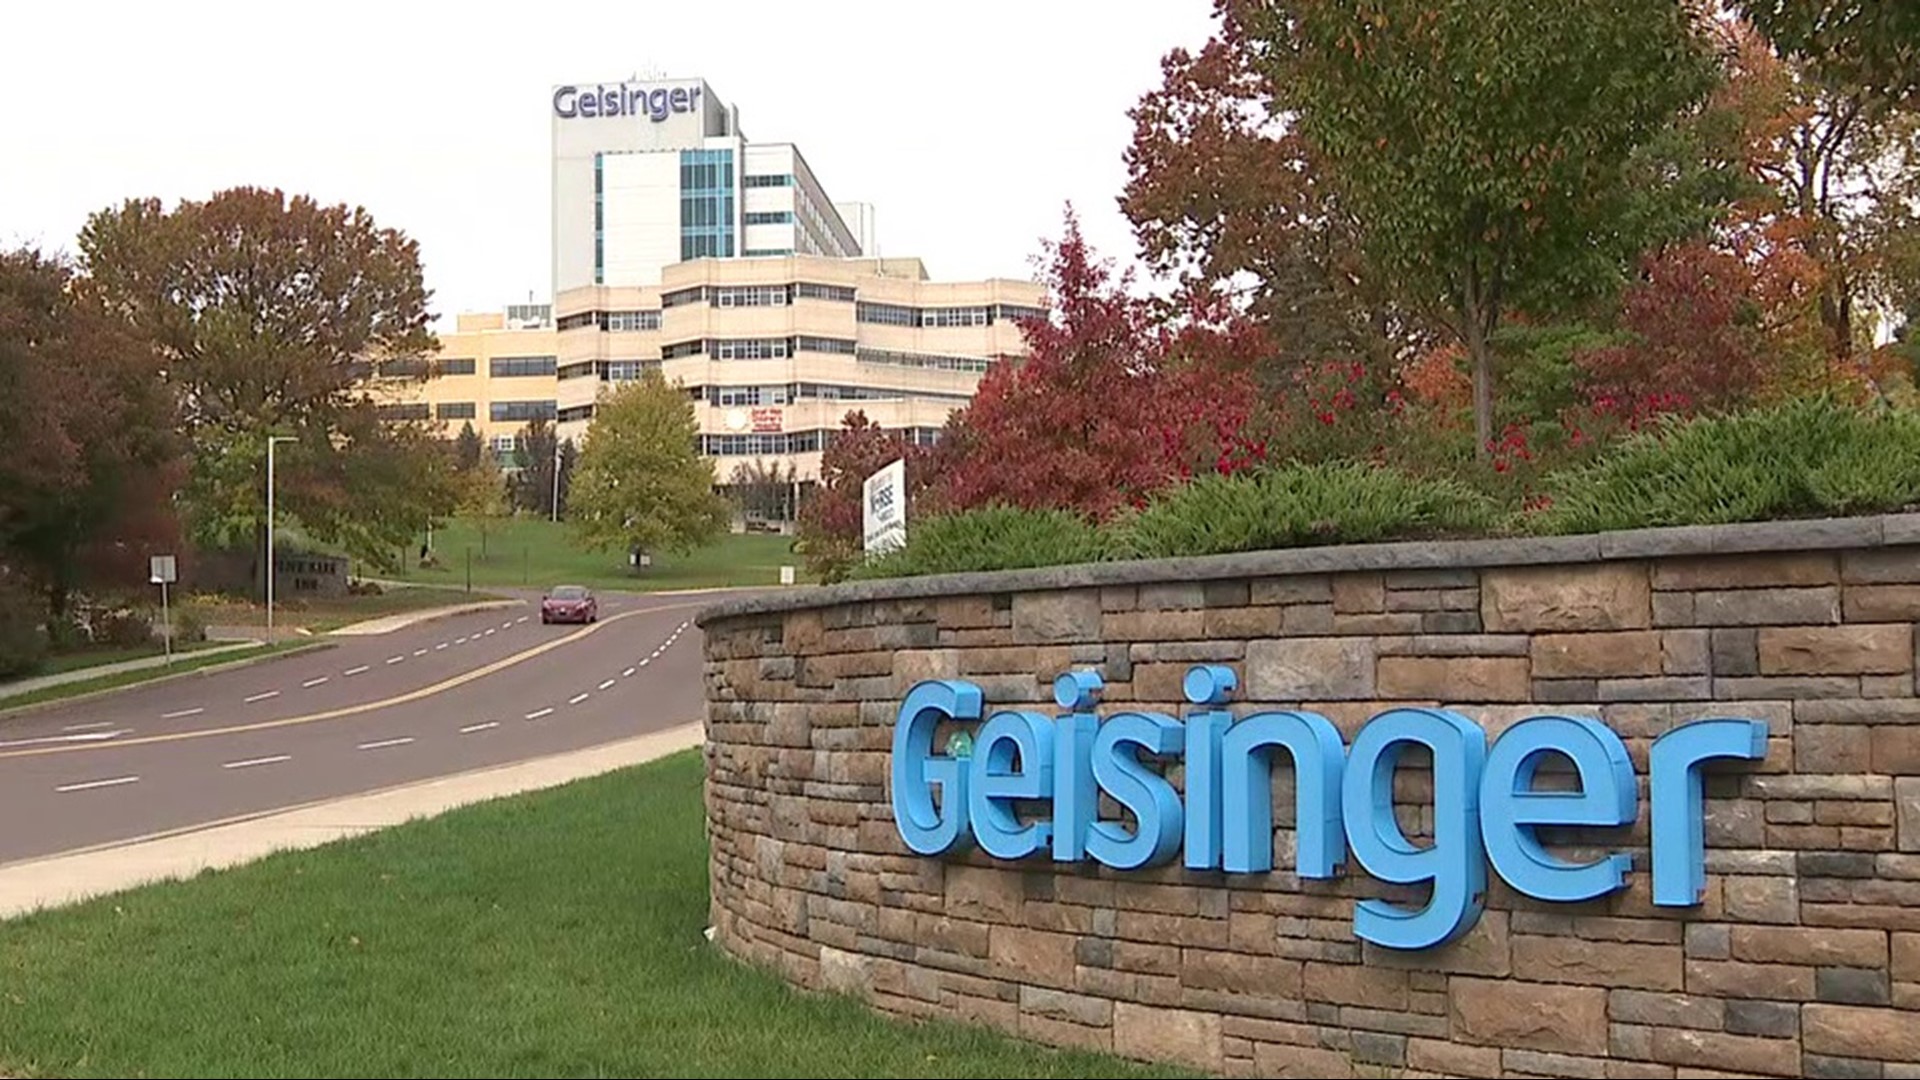 As the weather gets colder, Geisinger doctors are concerned about another resurgence of the coronavirus.